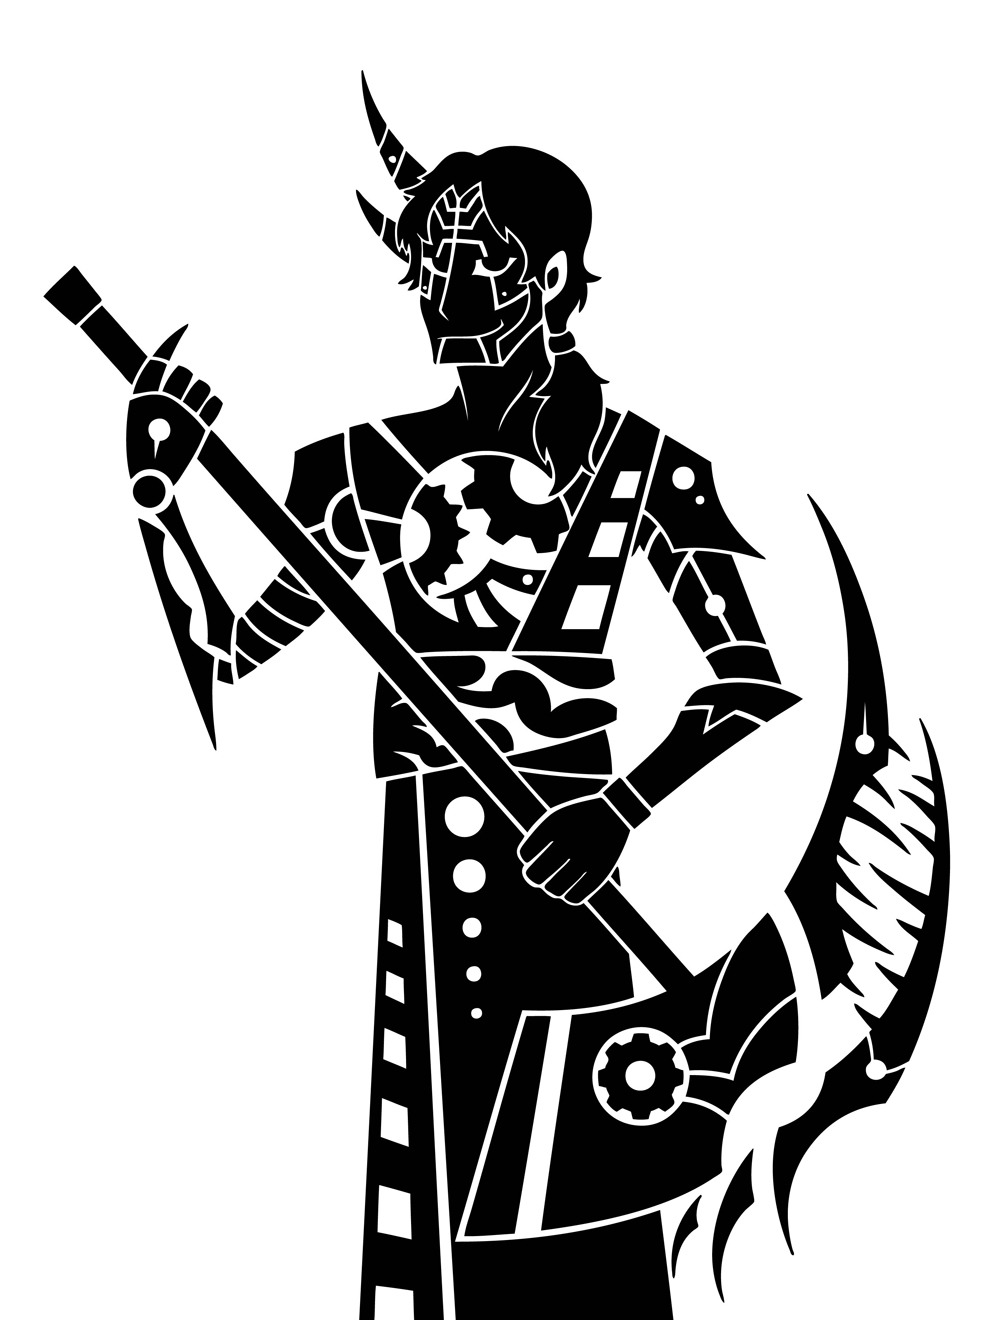 His Clockwork Servants — SCP Foundation art, Ion as the founder of the